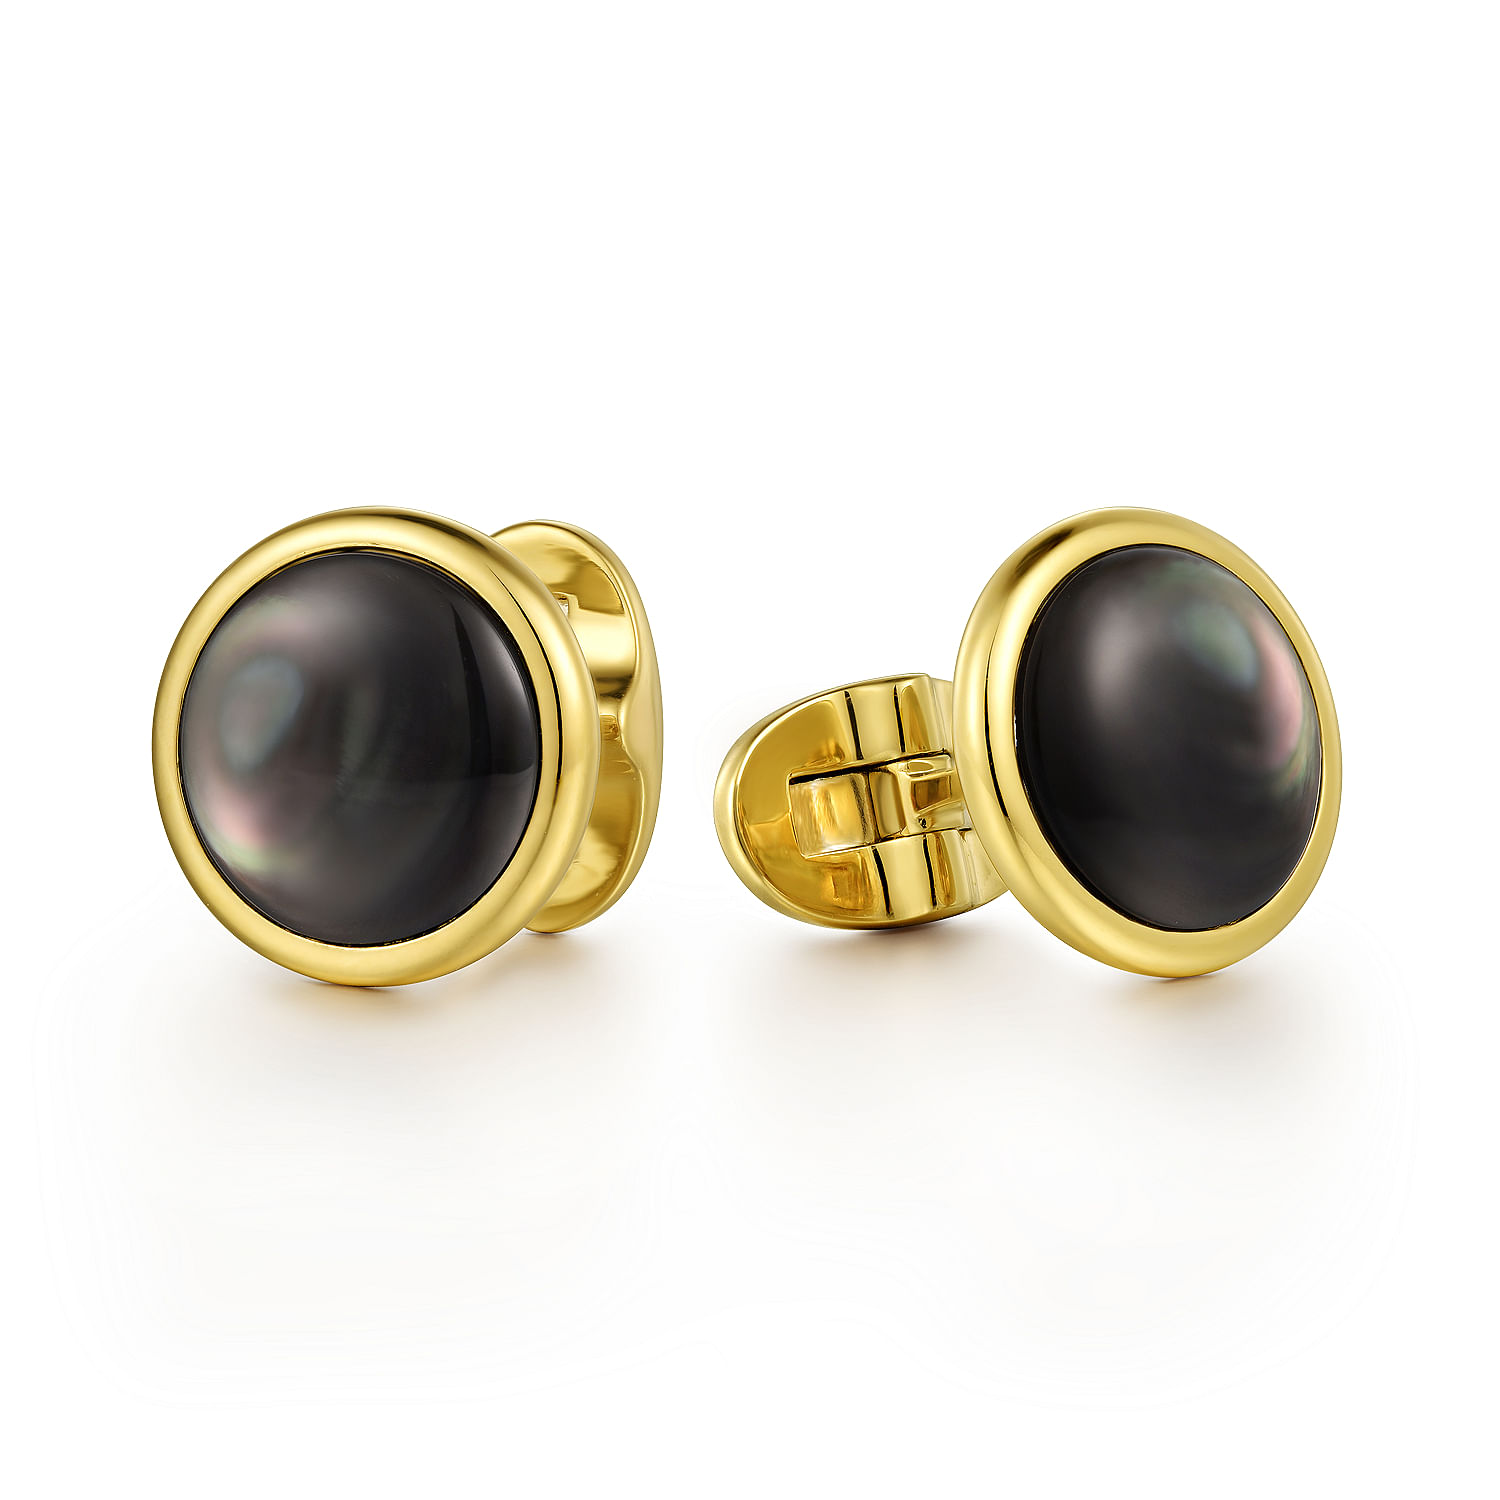 14K Yellow Gold Black Mother of Pearl Round Cufflinks